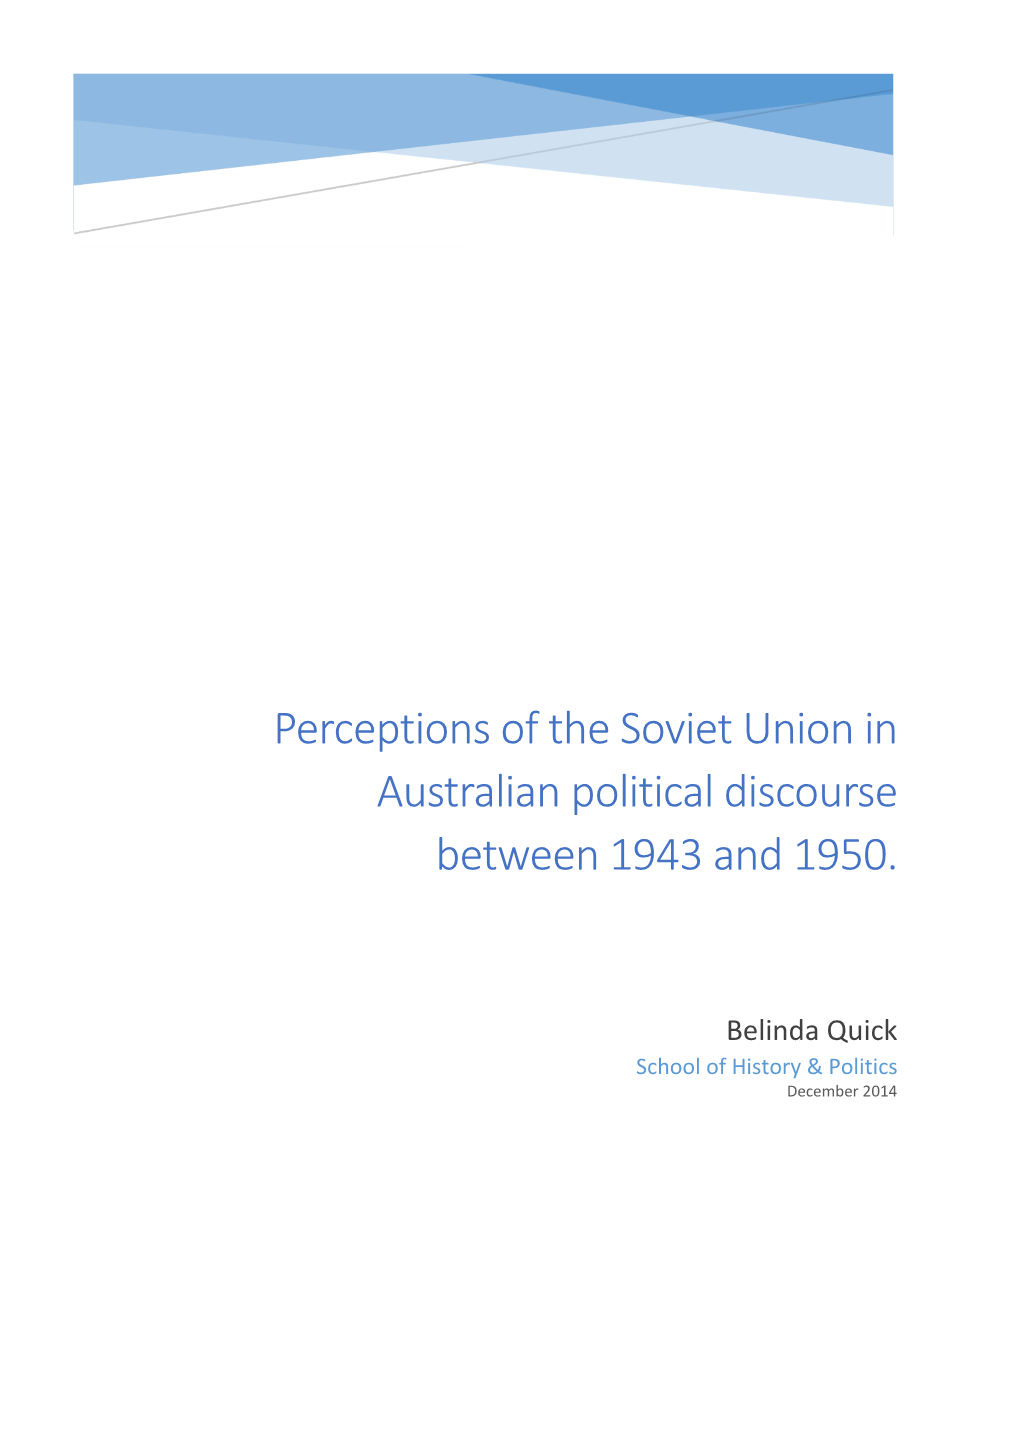 Perceptions of the Soviet Union in Australian Political Discourse Between 1943 and 1950